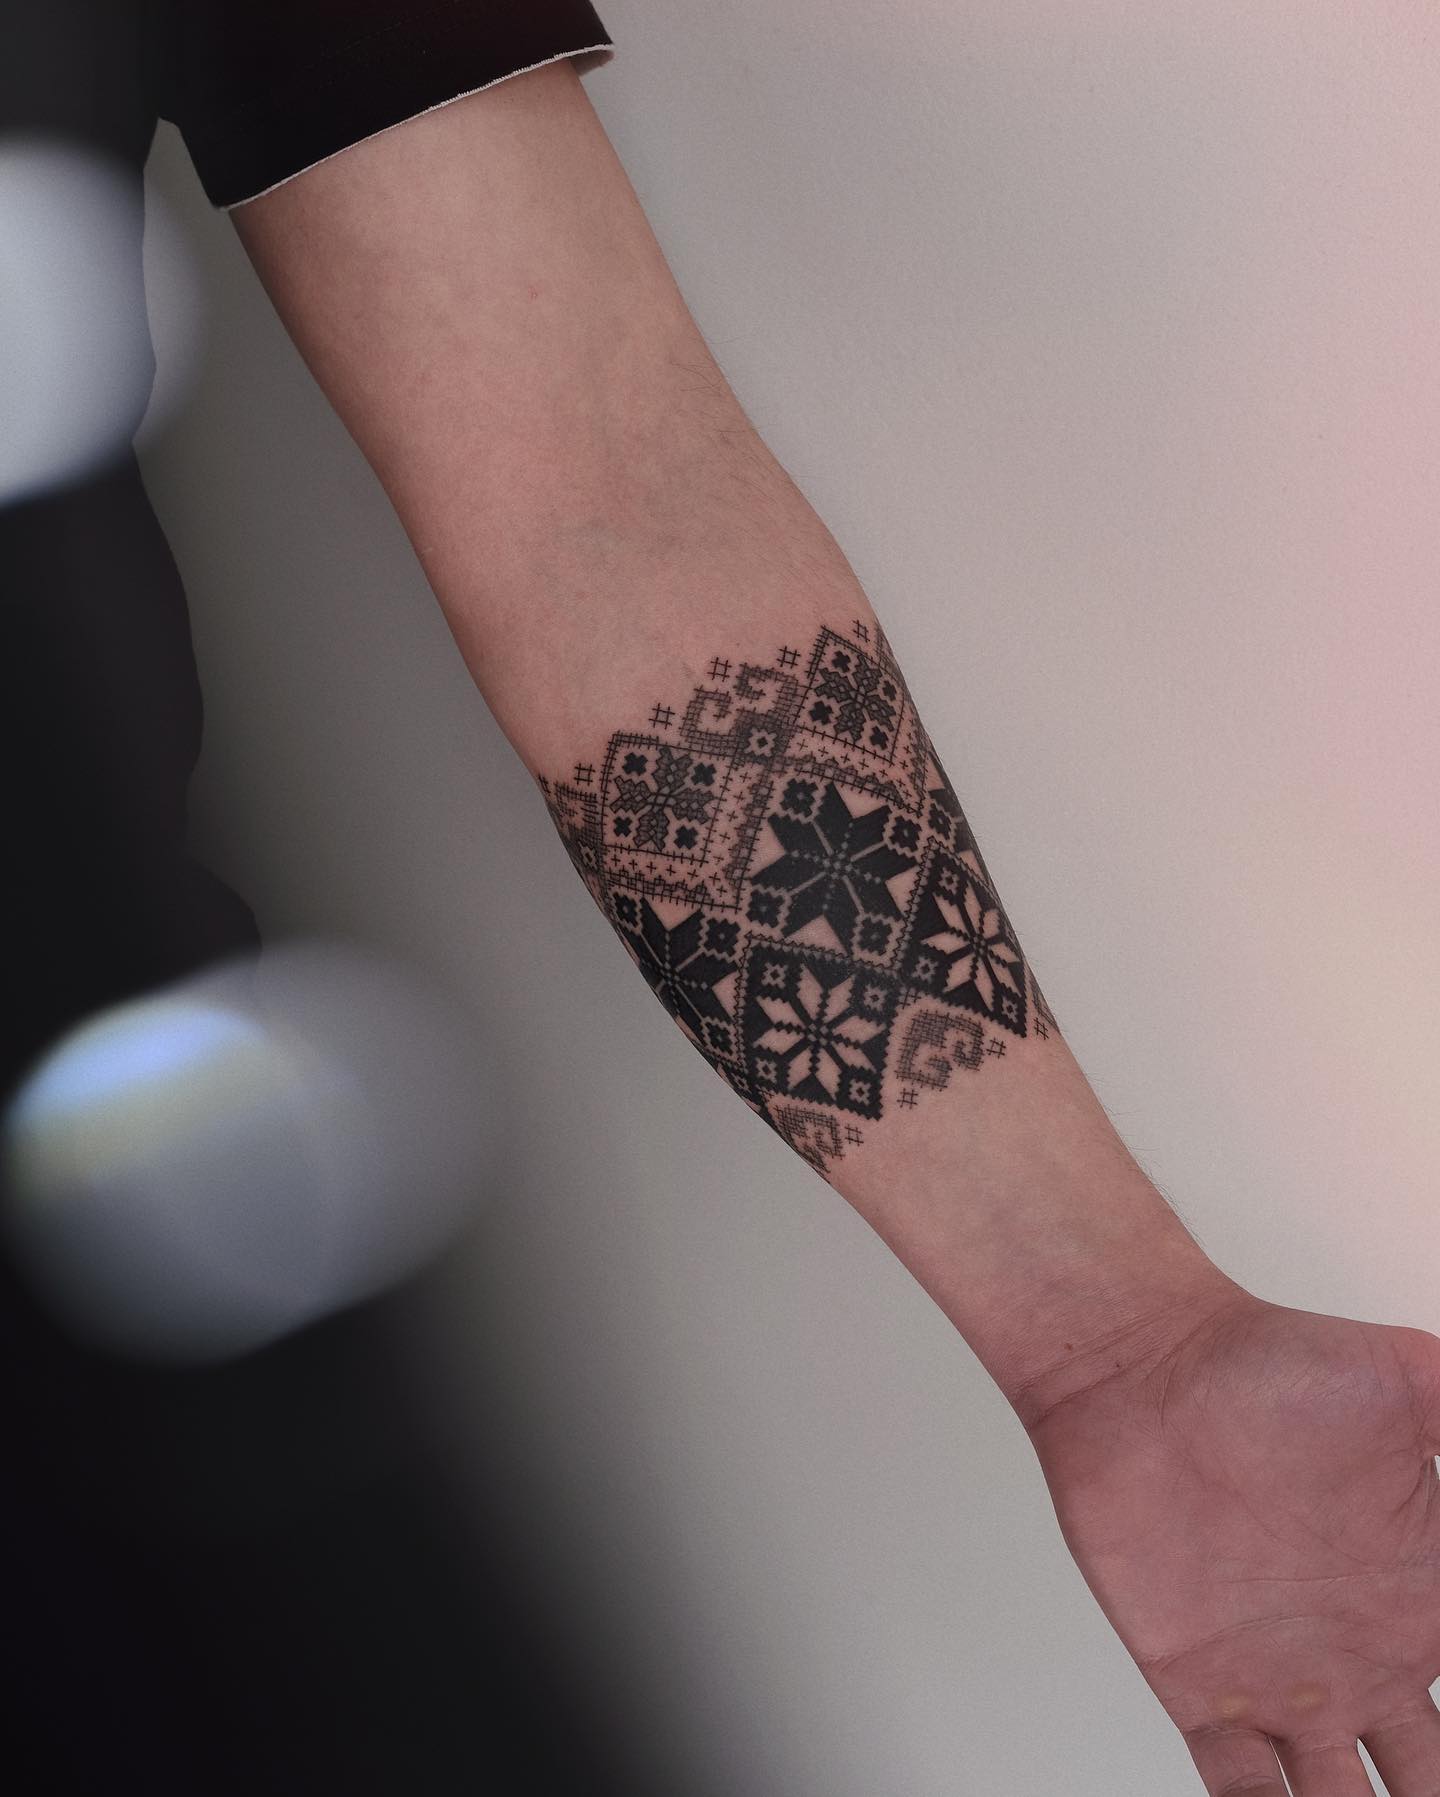 Black and white embroidery bracelet tattoo